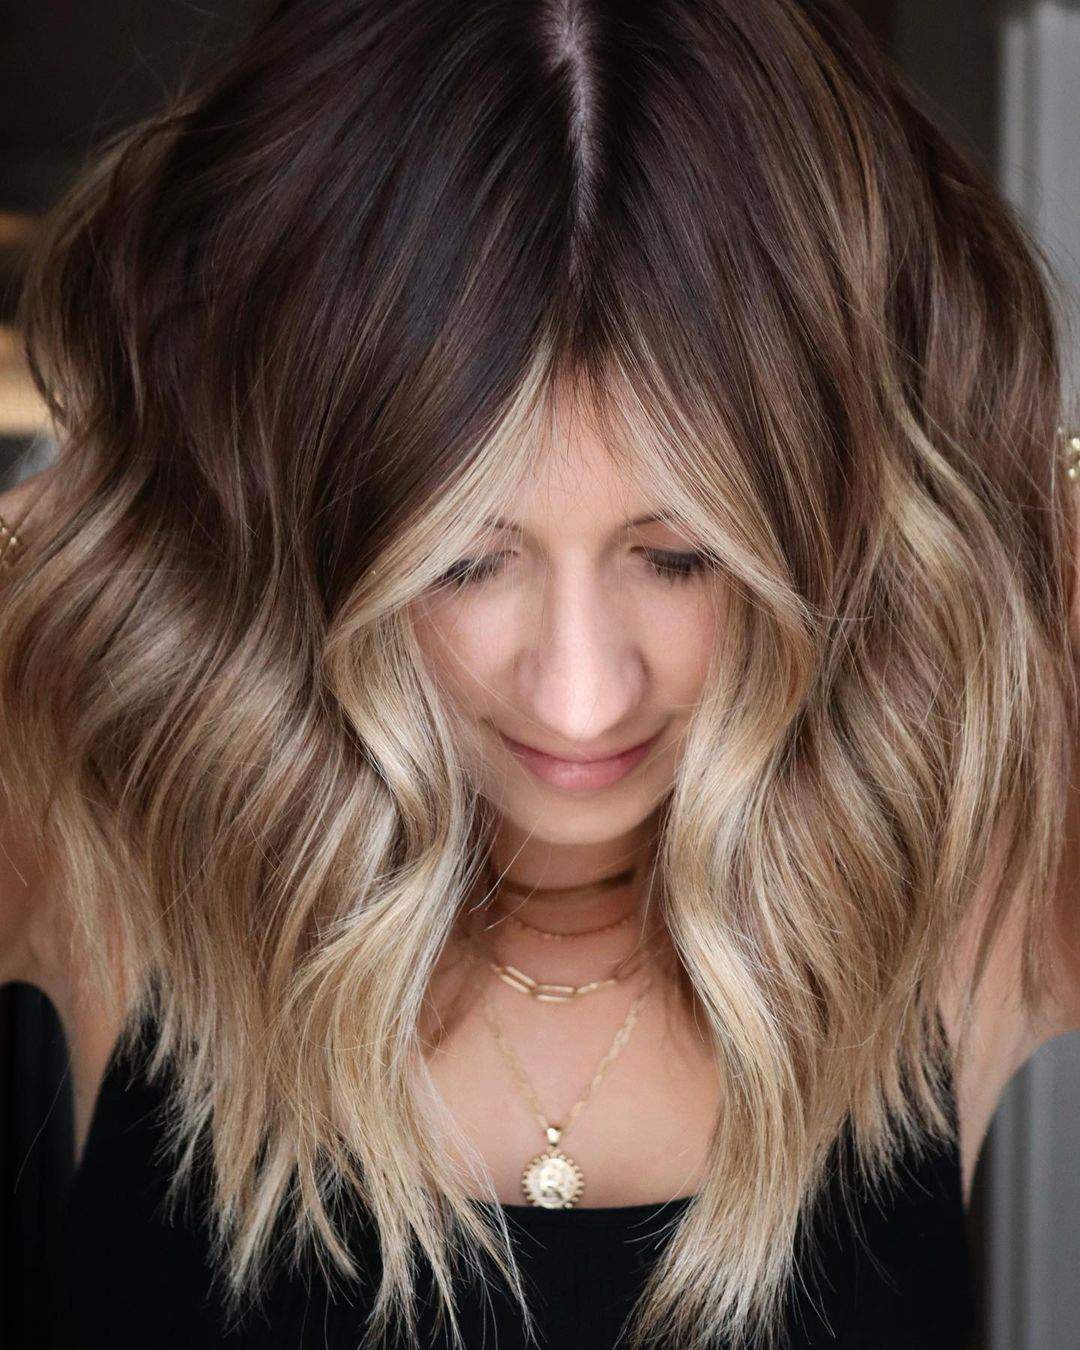 100+ Trendy Hairstyle Ideas For Women To Try In 2021 images 23